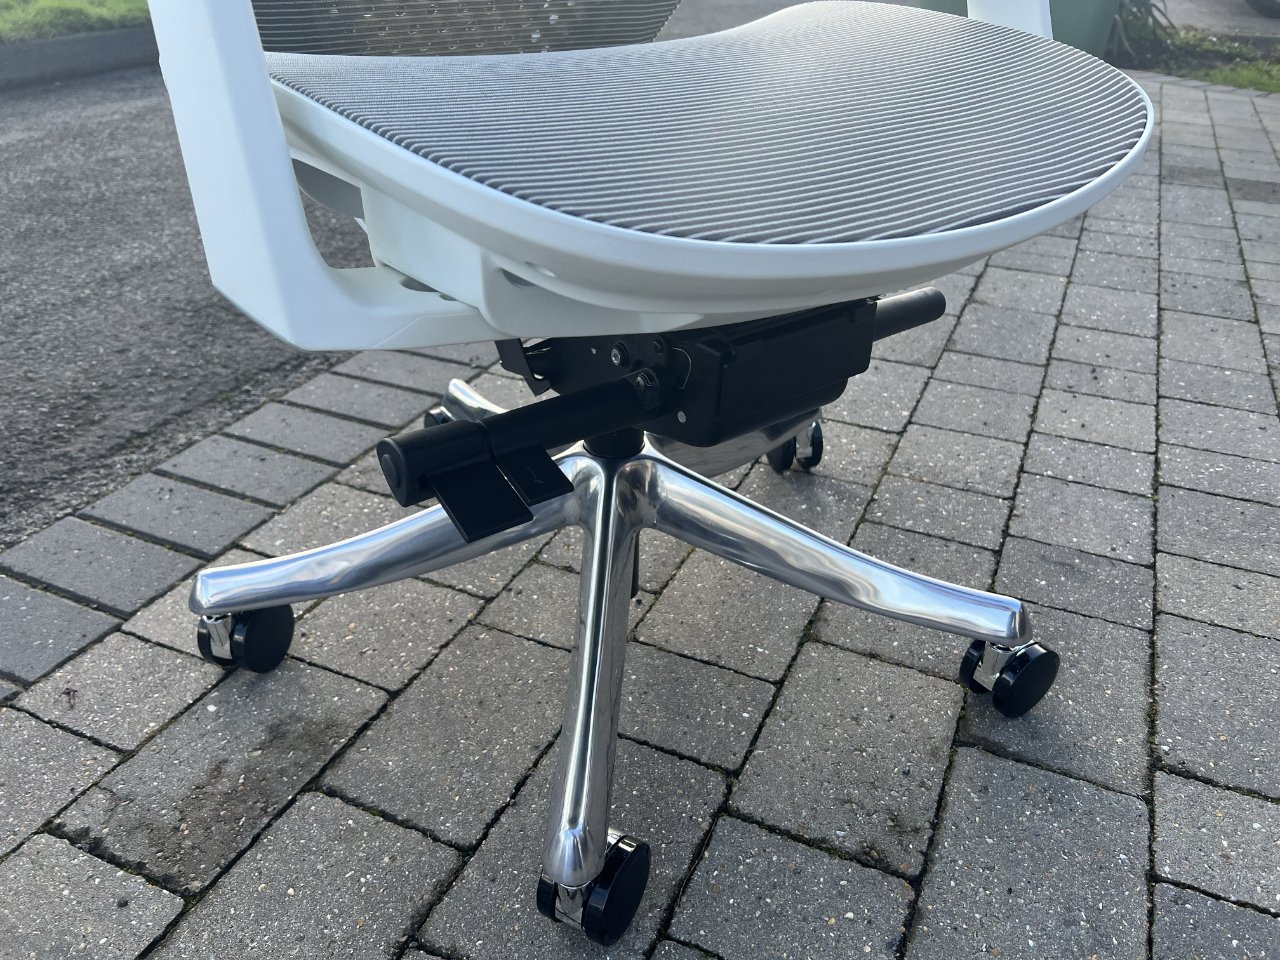 The plastic top makes the chair feel light to move around, and the metal base gives it weight and support